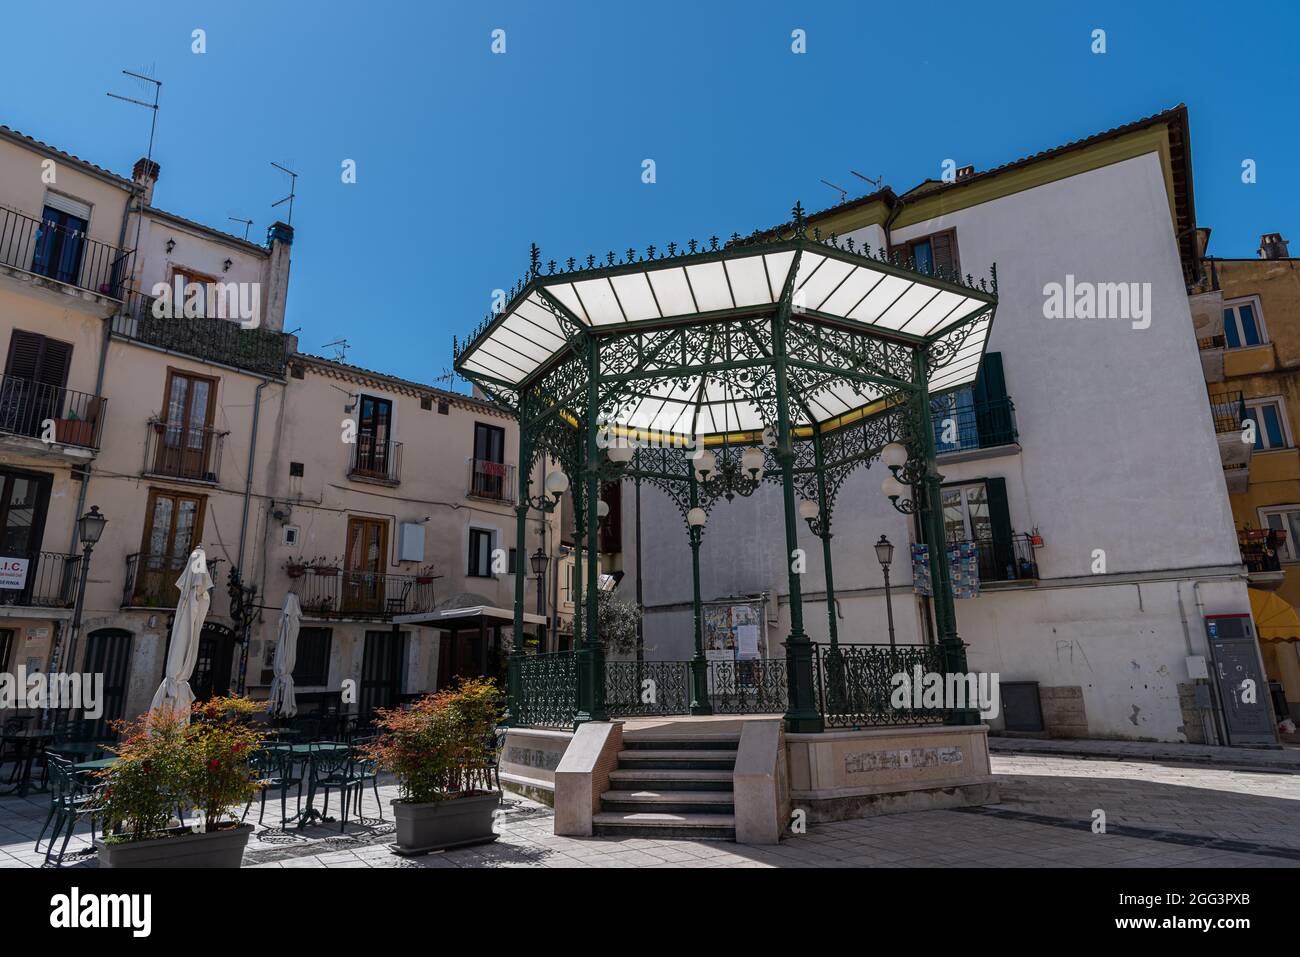 Glimpses of the historic center of Isernia, capital of the homonymous province of Molise, a pleasant town with a cool climate in summer and not too co Stock Photo